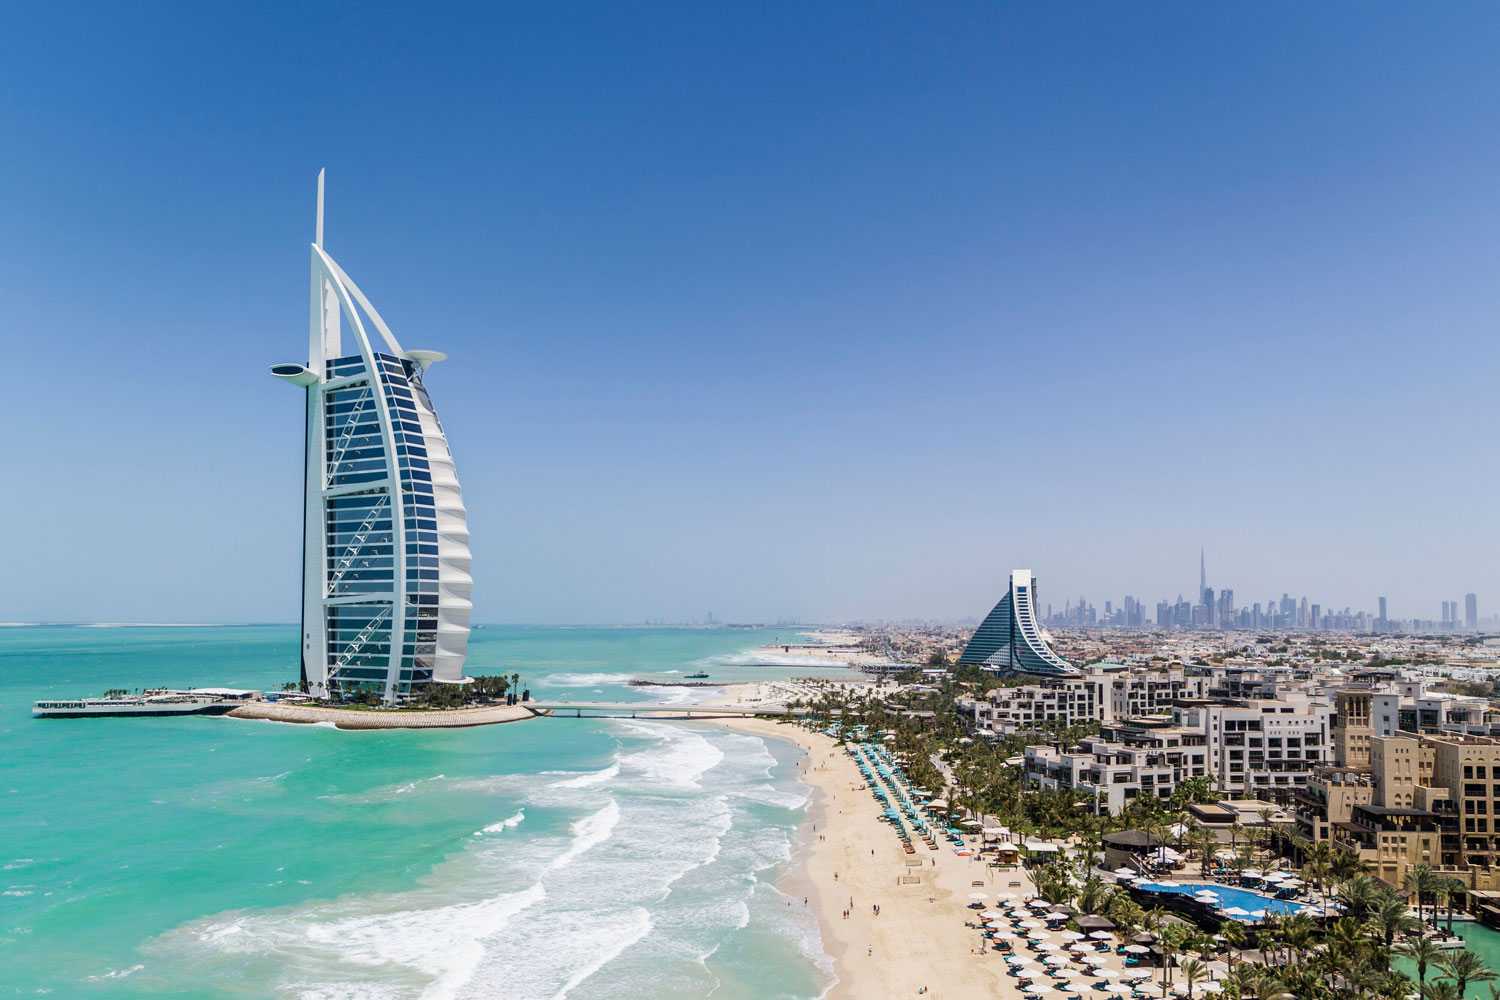 Discover the Allure of the East with IRCTC “Dazzling Dubai” Tour Package